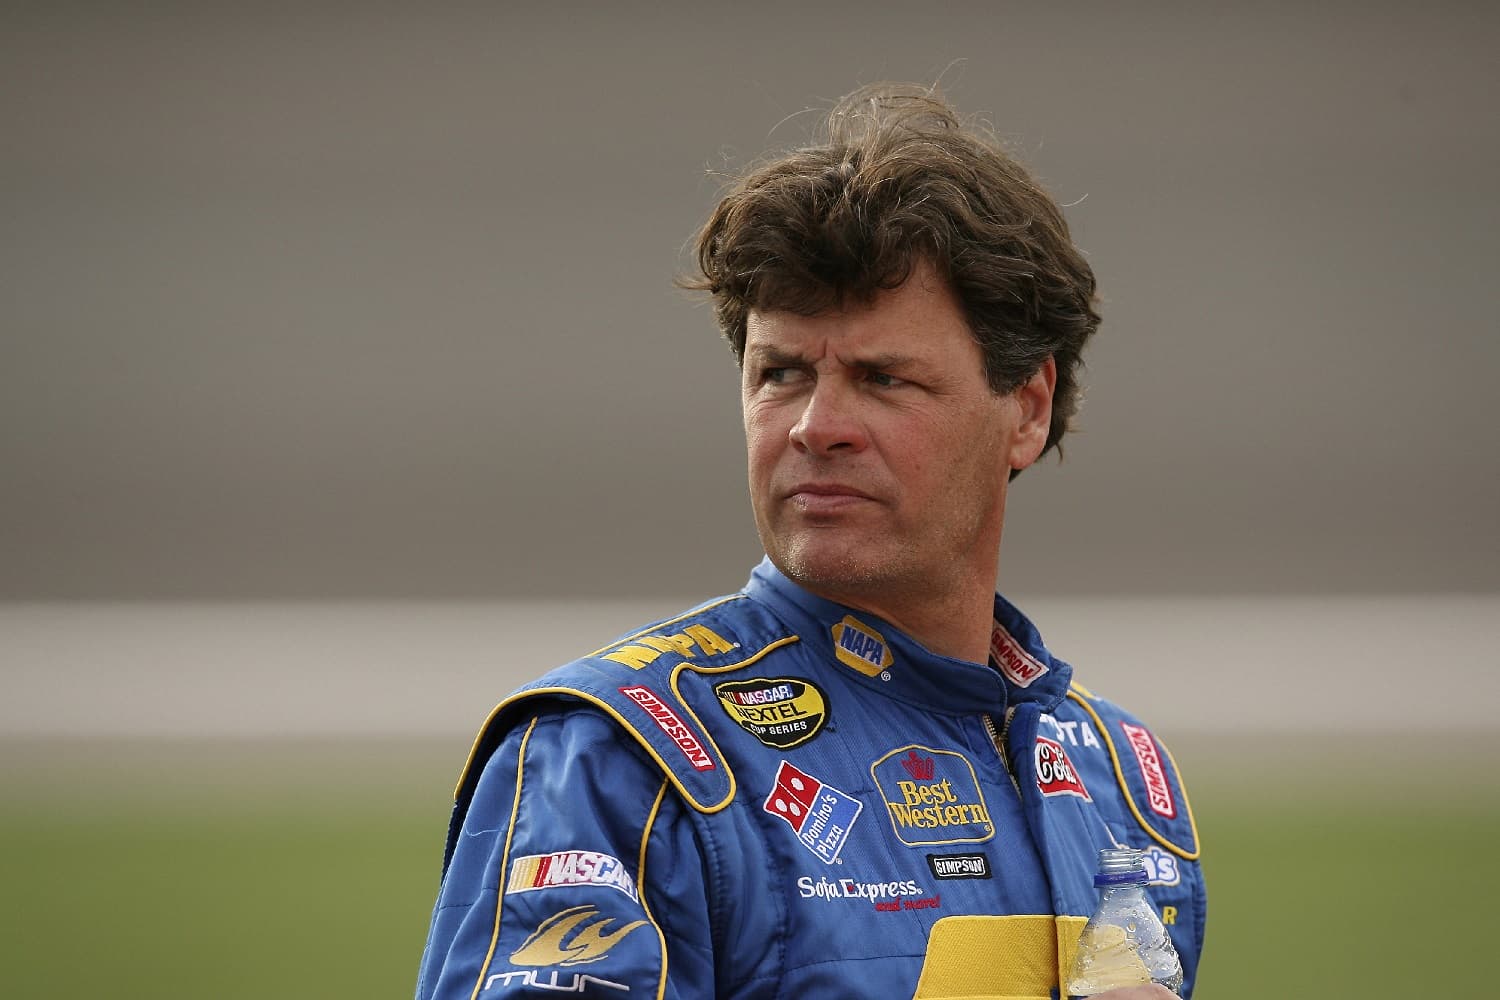 I Asked ChatGPT to Summarize NASCAR’s Biggest Scandal; It Did Not Disappoint Anyone Except Maybe Michael Waltrip